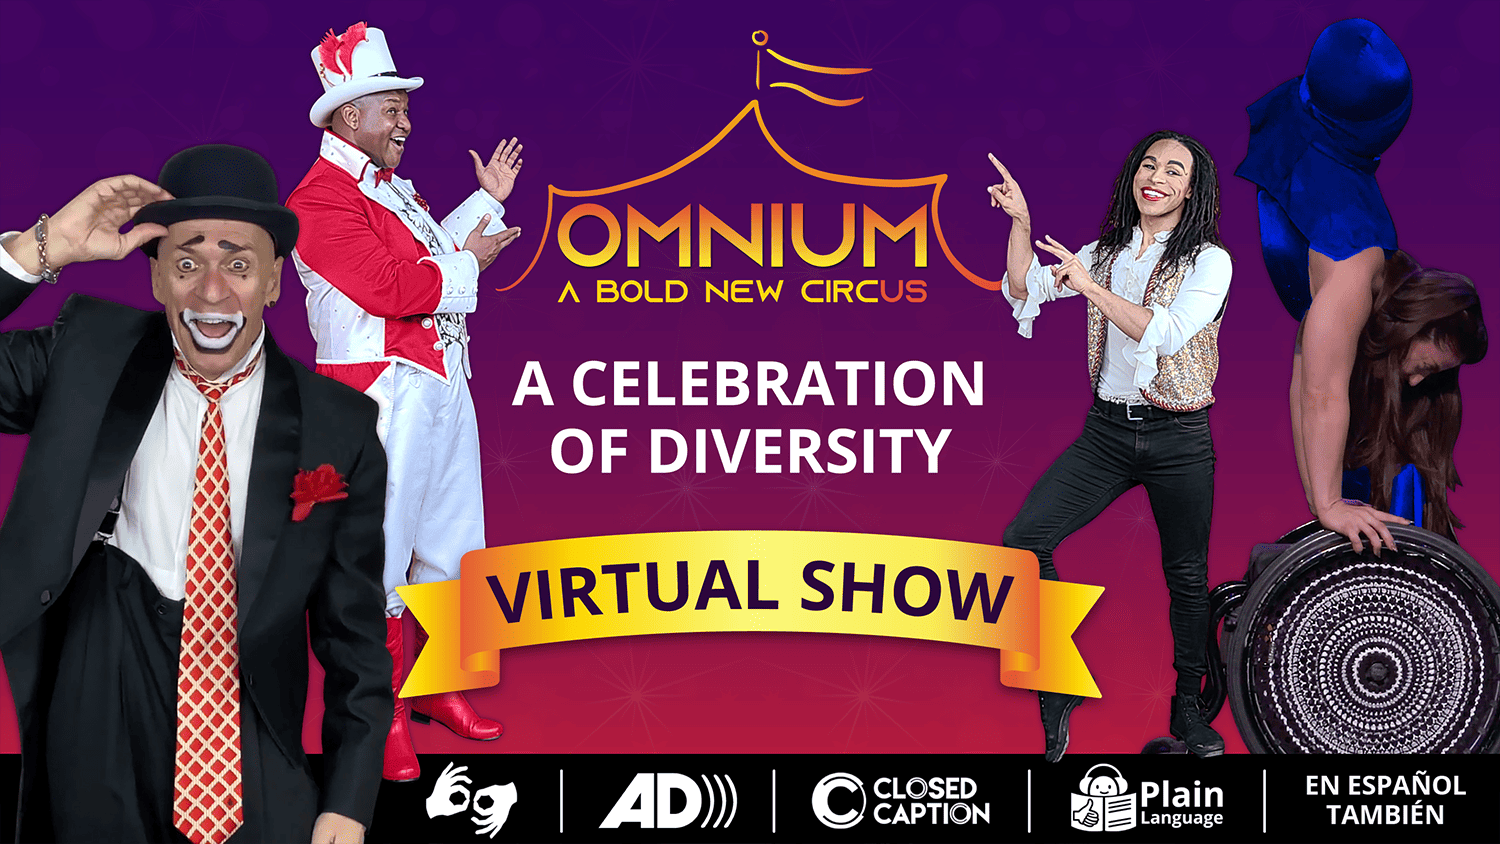 Graphic: "Omnium a Bold New Circus: A Celebration of Diversity Virtual Show"